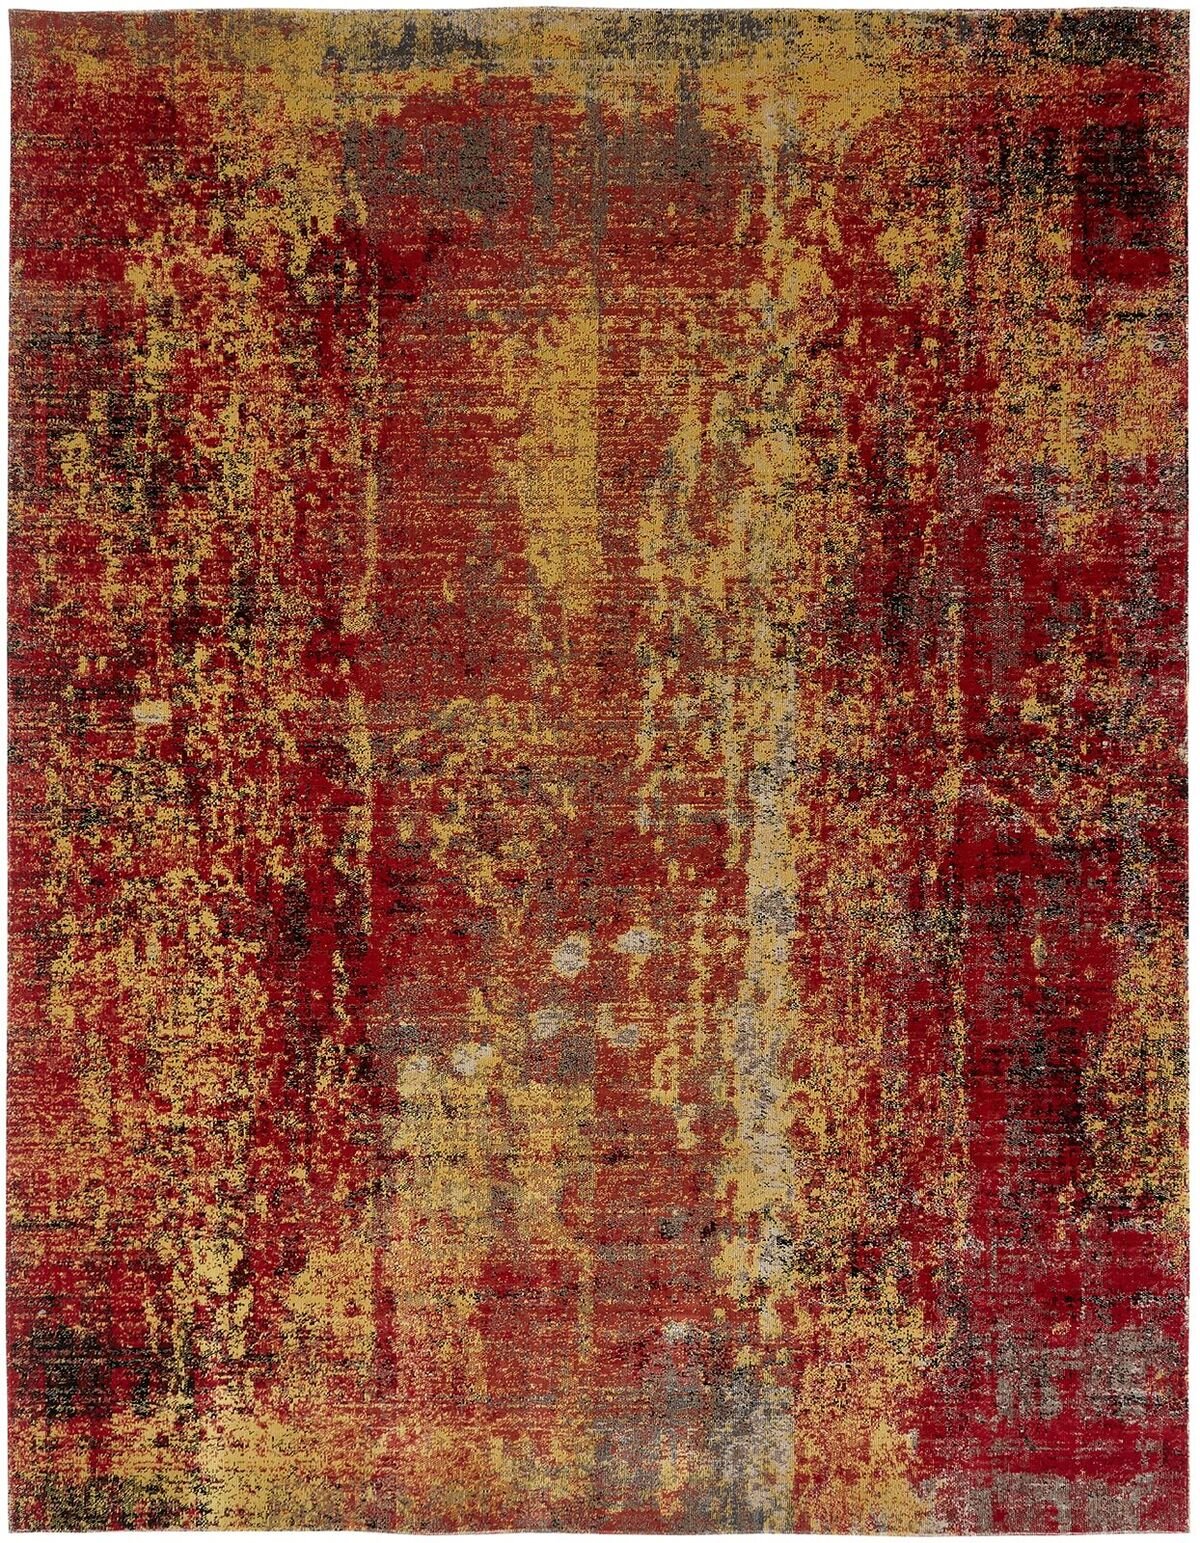 Modena Painted Desert Abstract Area Rug